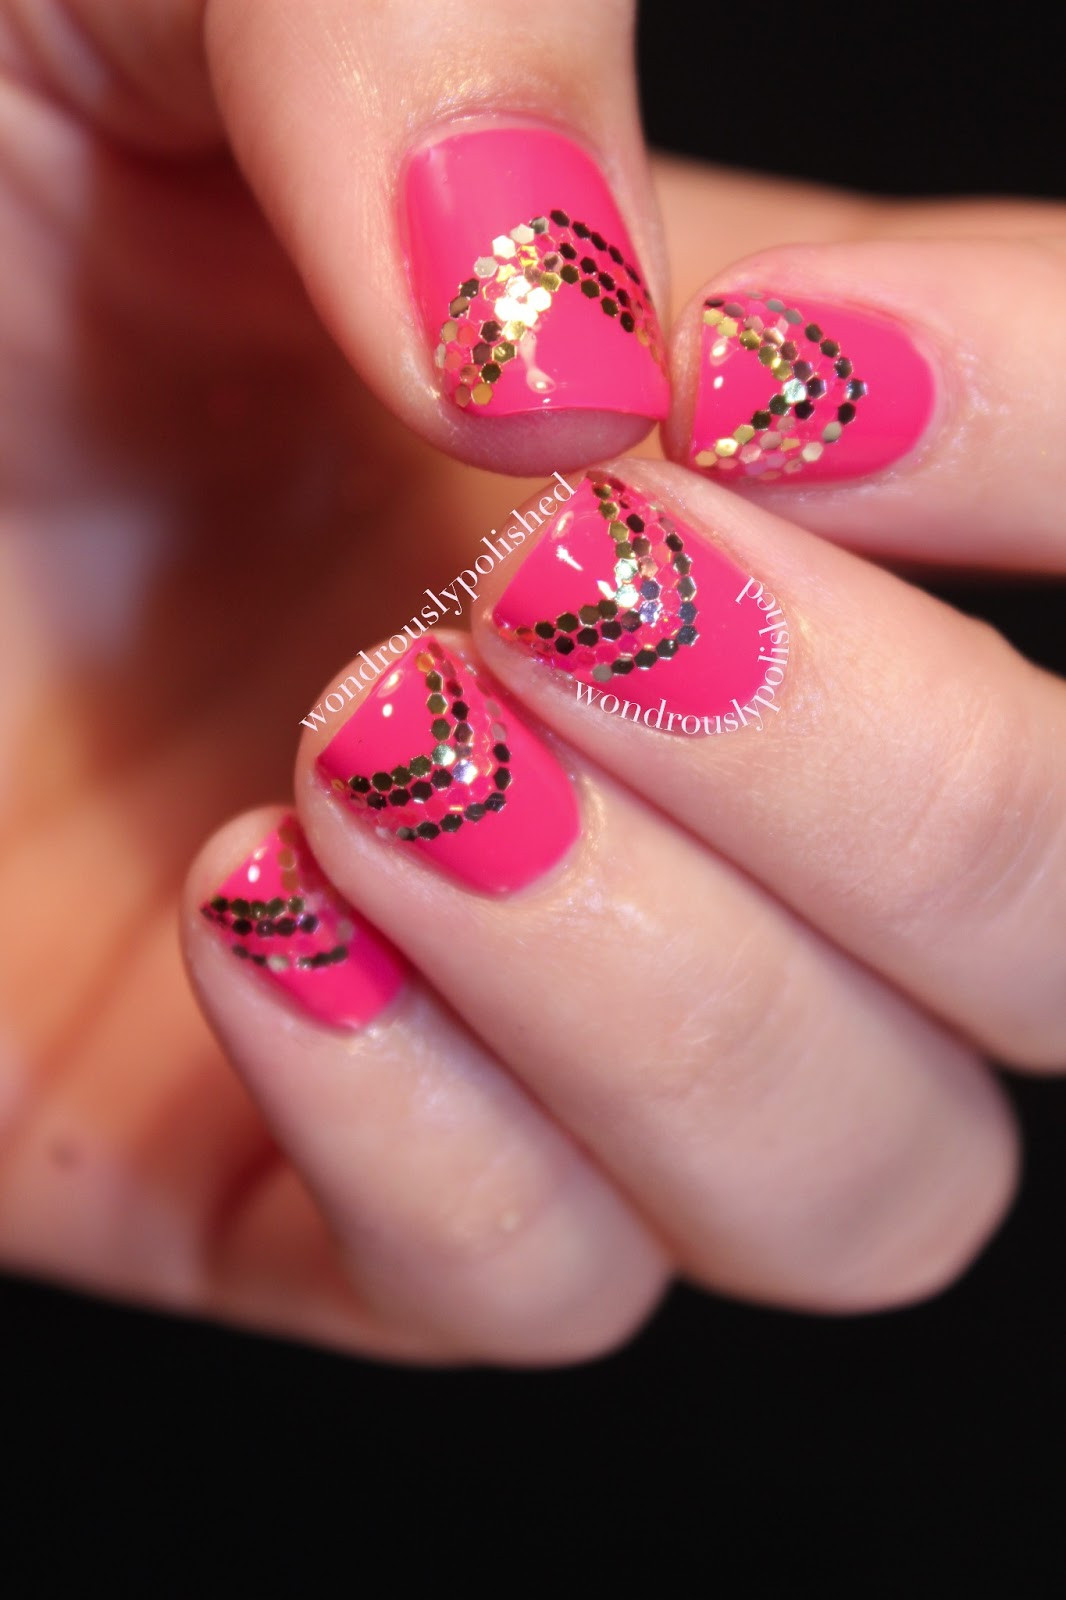 March Nail Designs
 Wondrously Polished March Nail Art Challenge Day 1